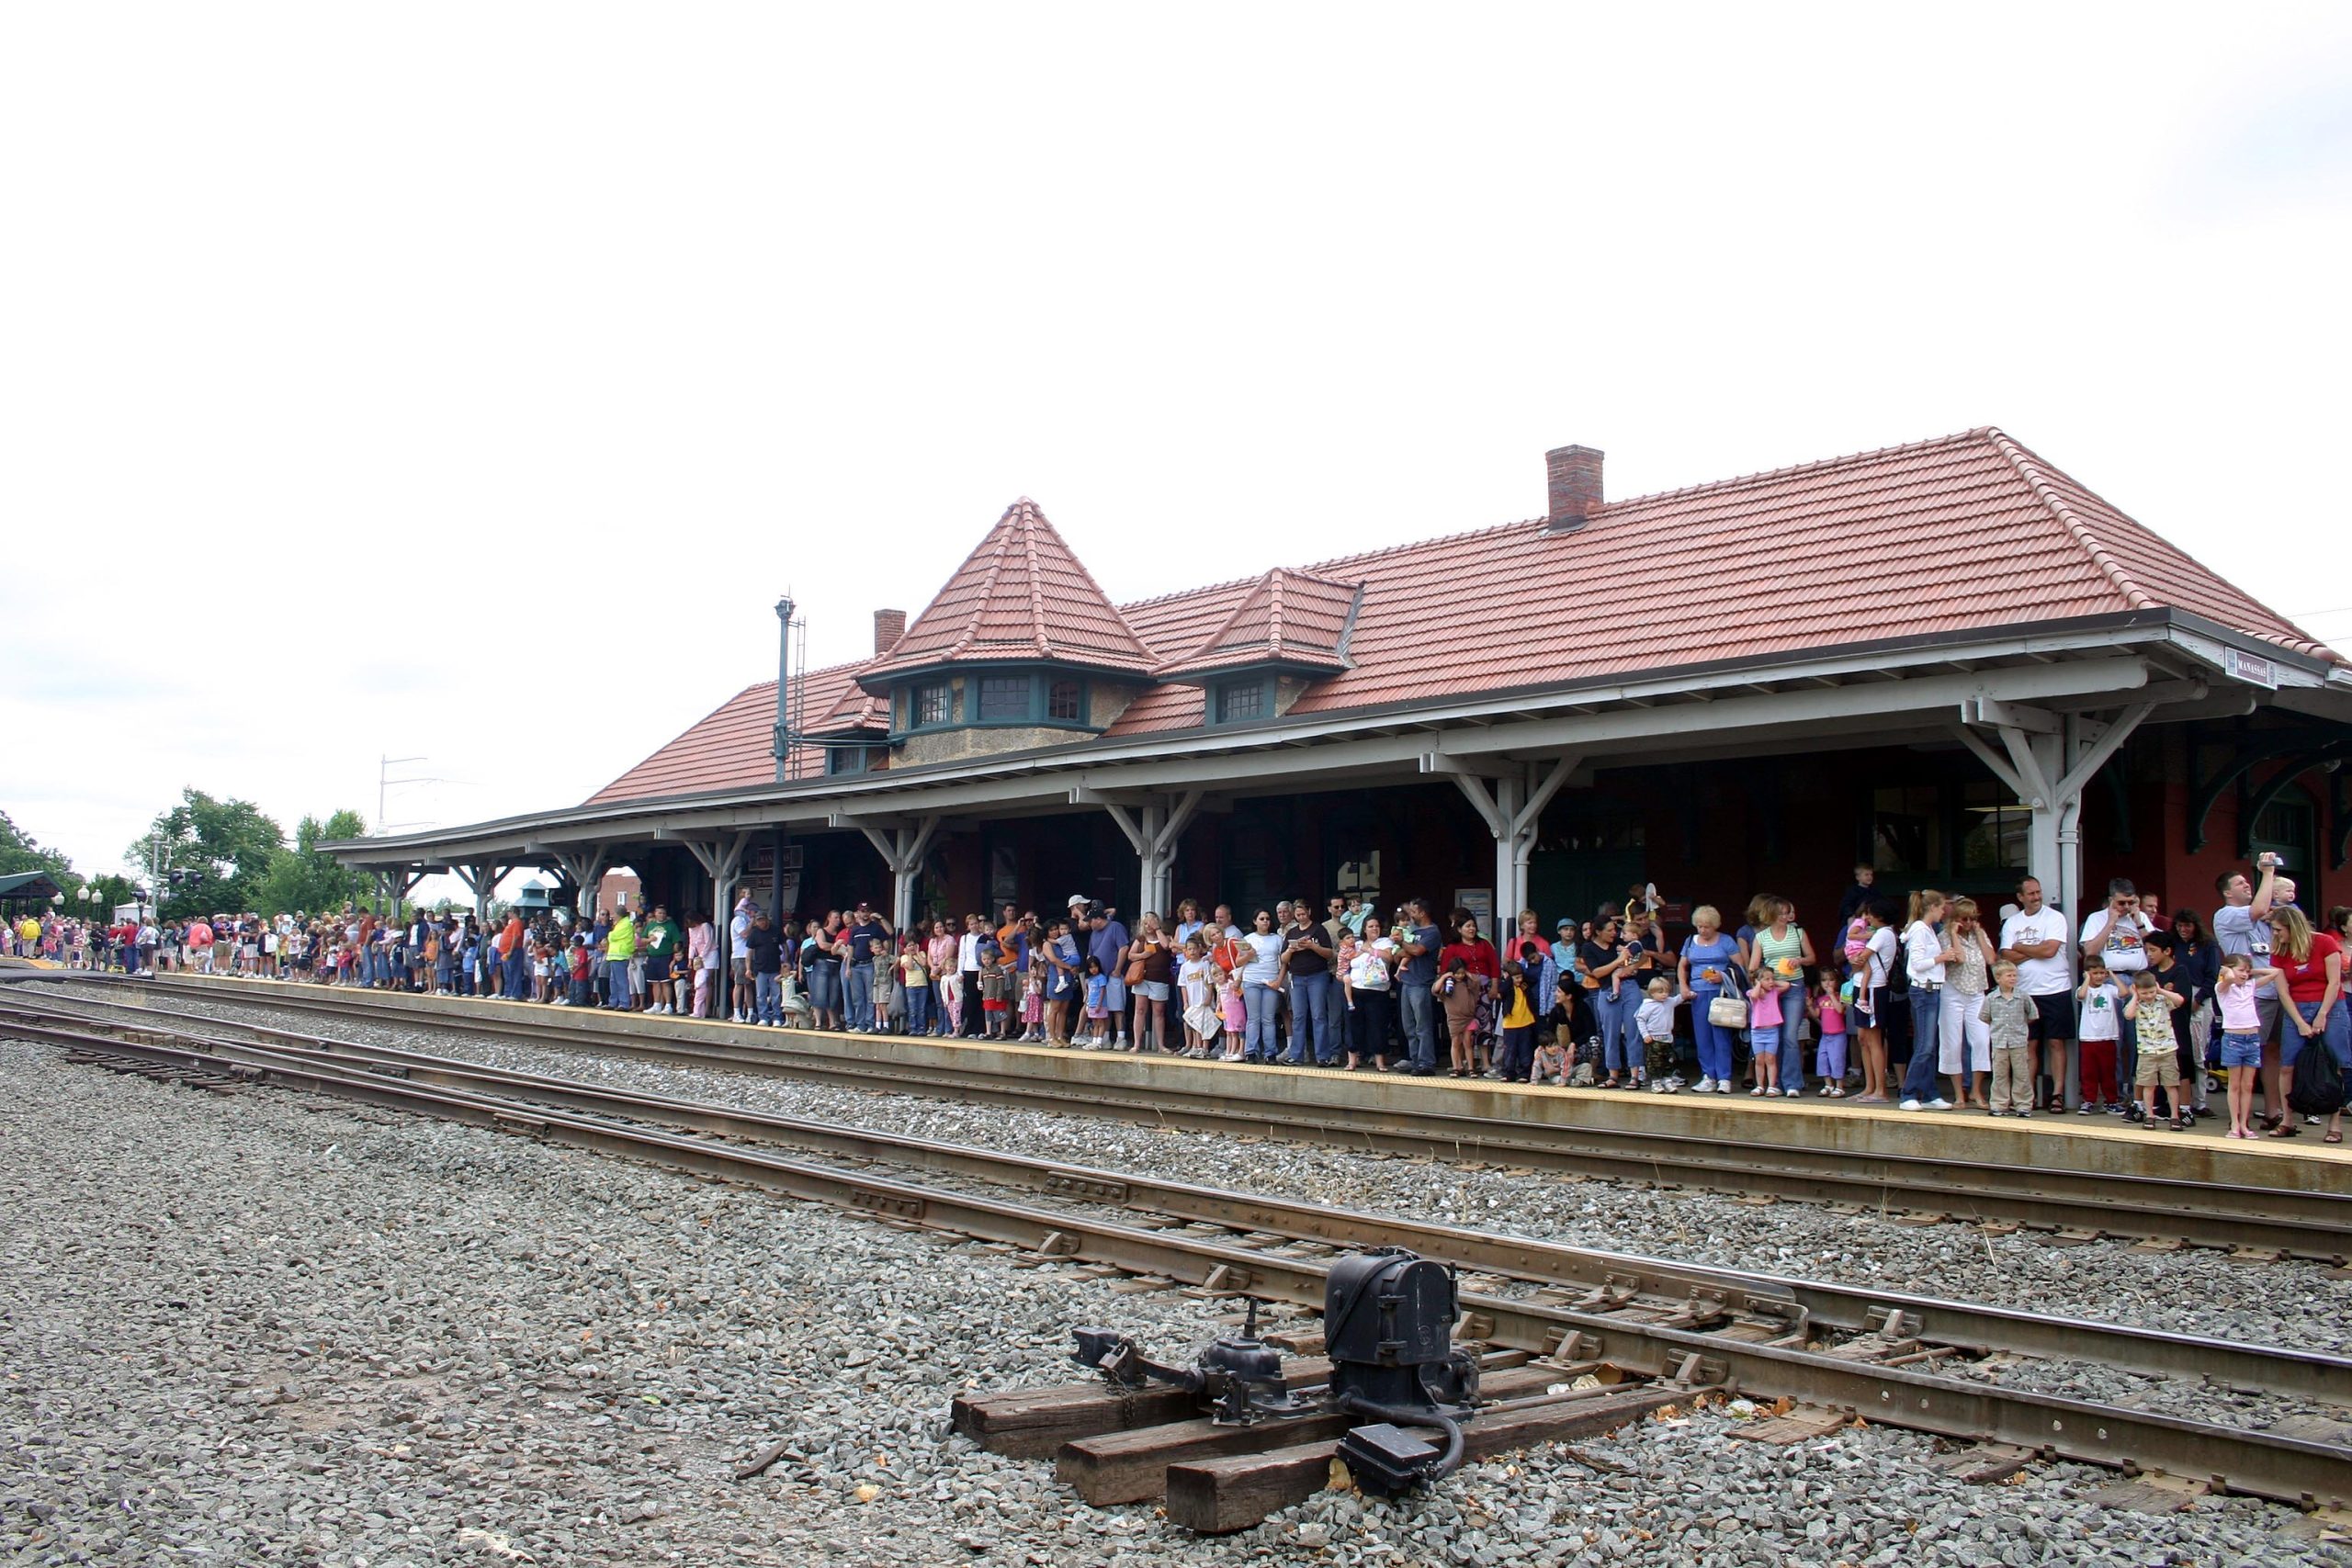 Manassas Railway Festival A MustSee Event for Railway Enthusiasts